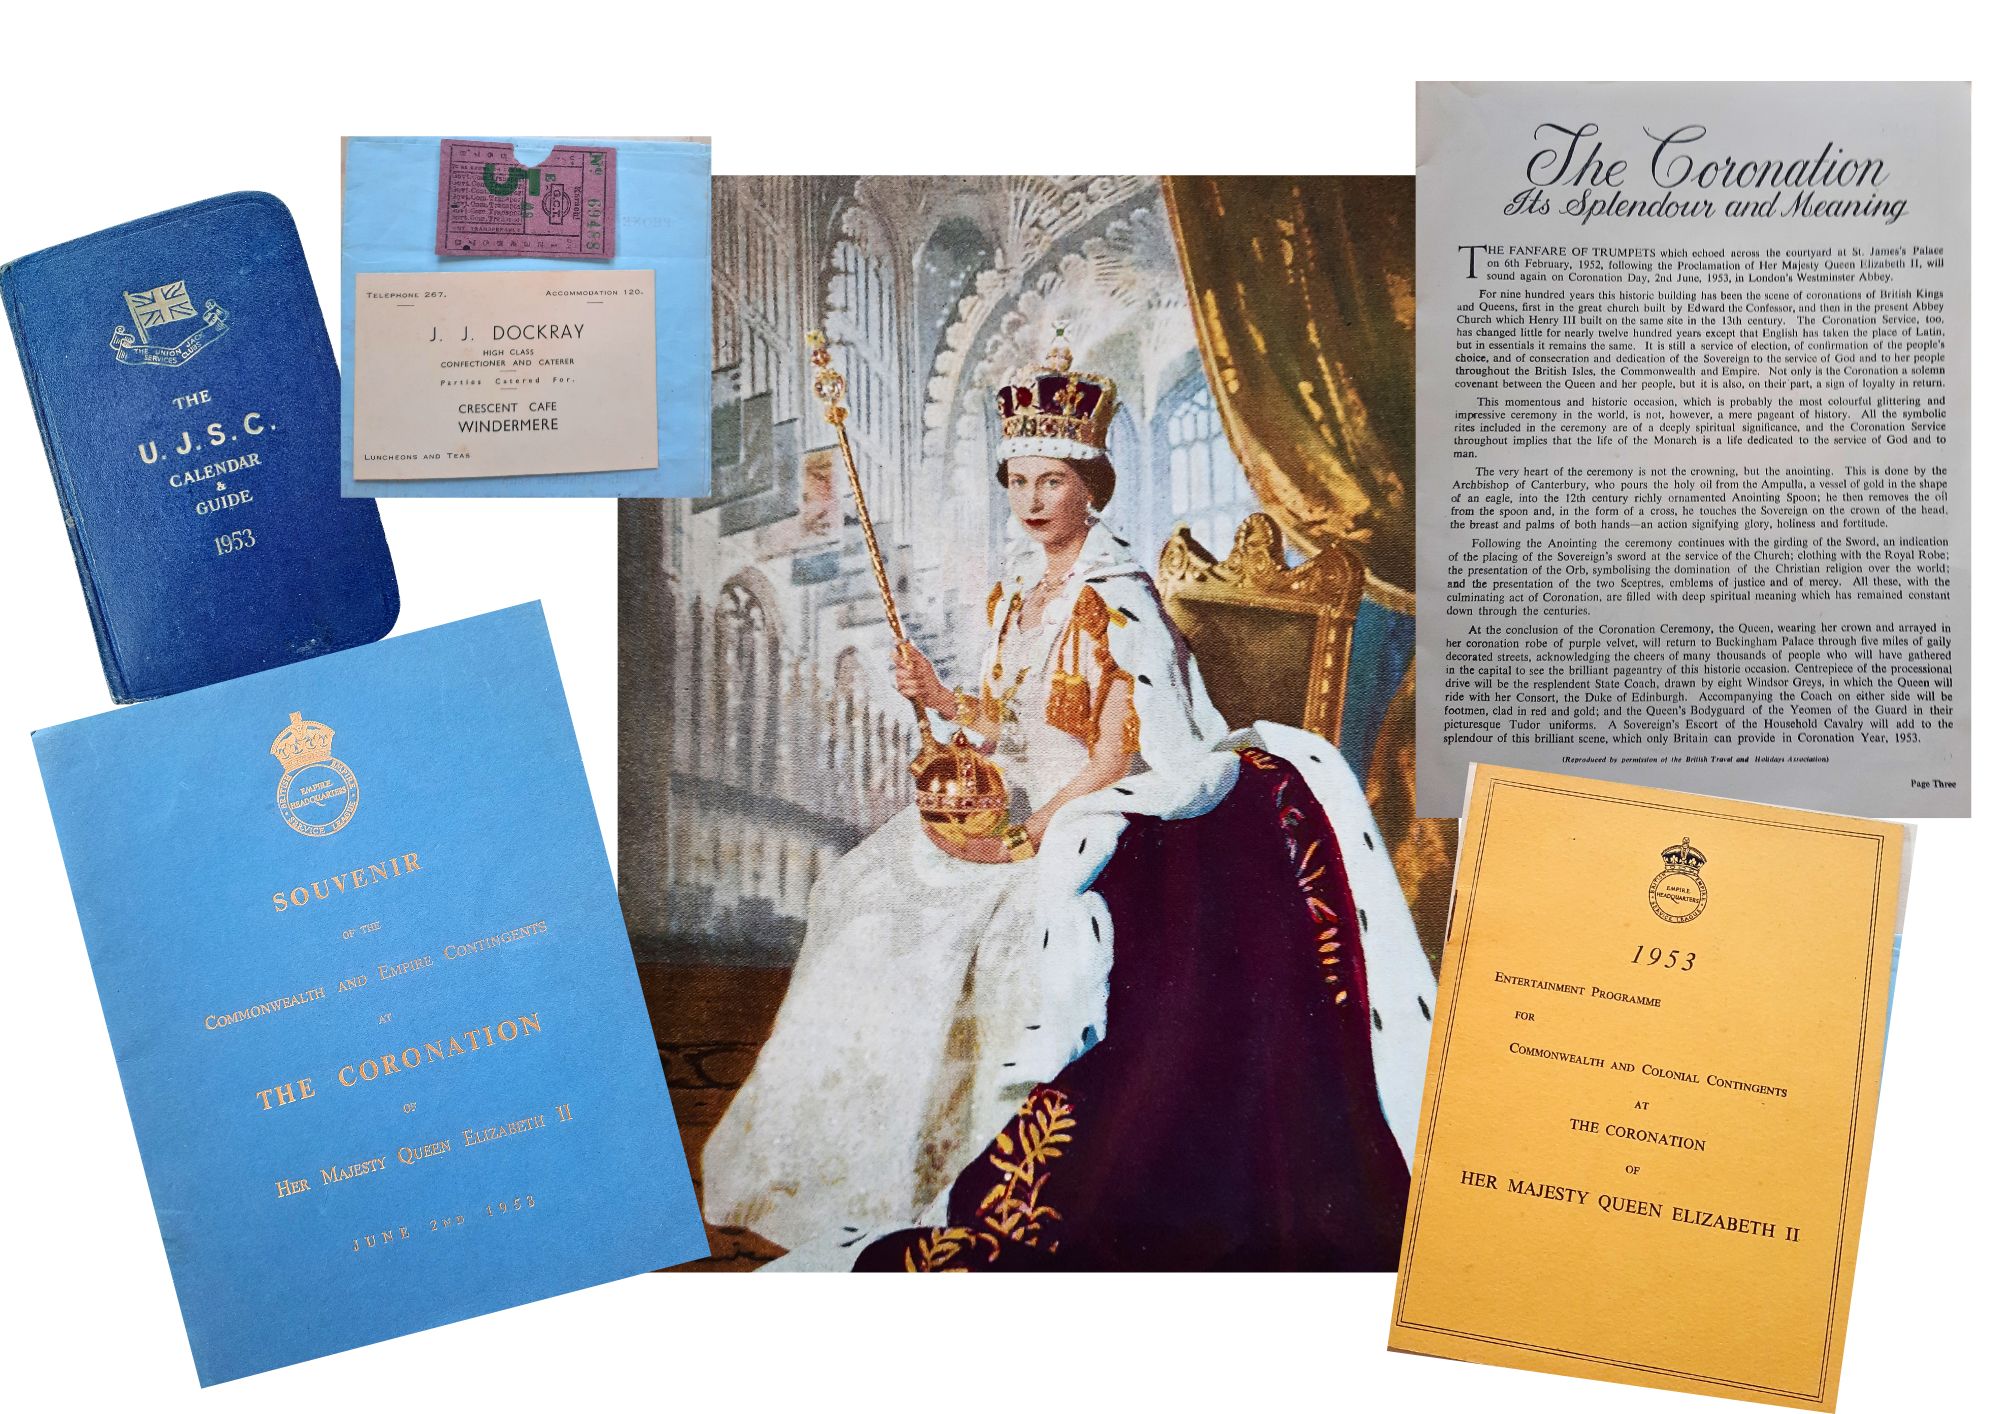 Down Memory Lane: The Honour Of Attending The Queen’s Coronation